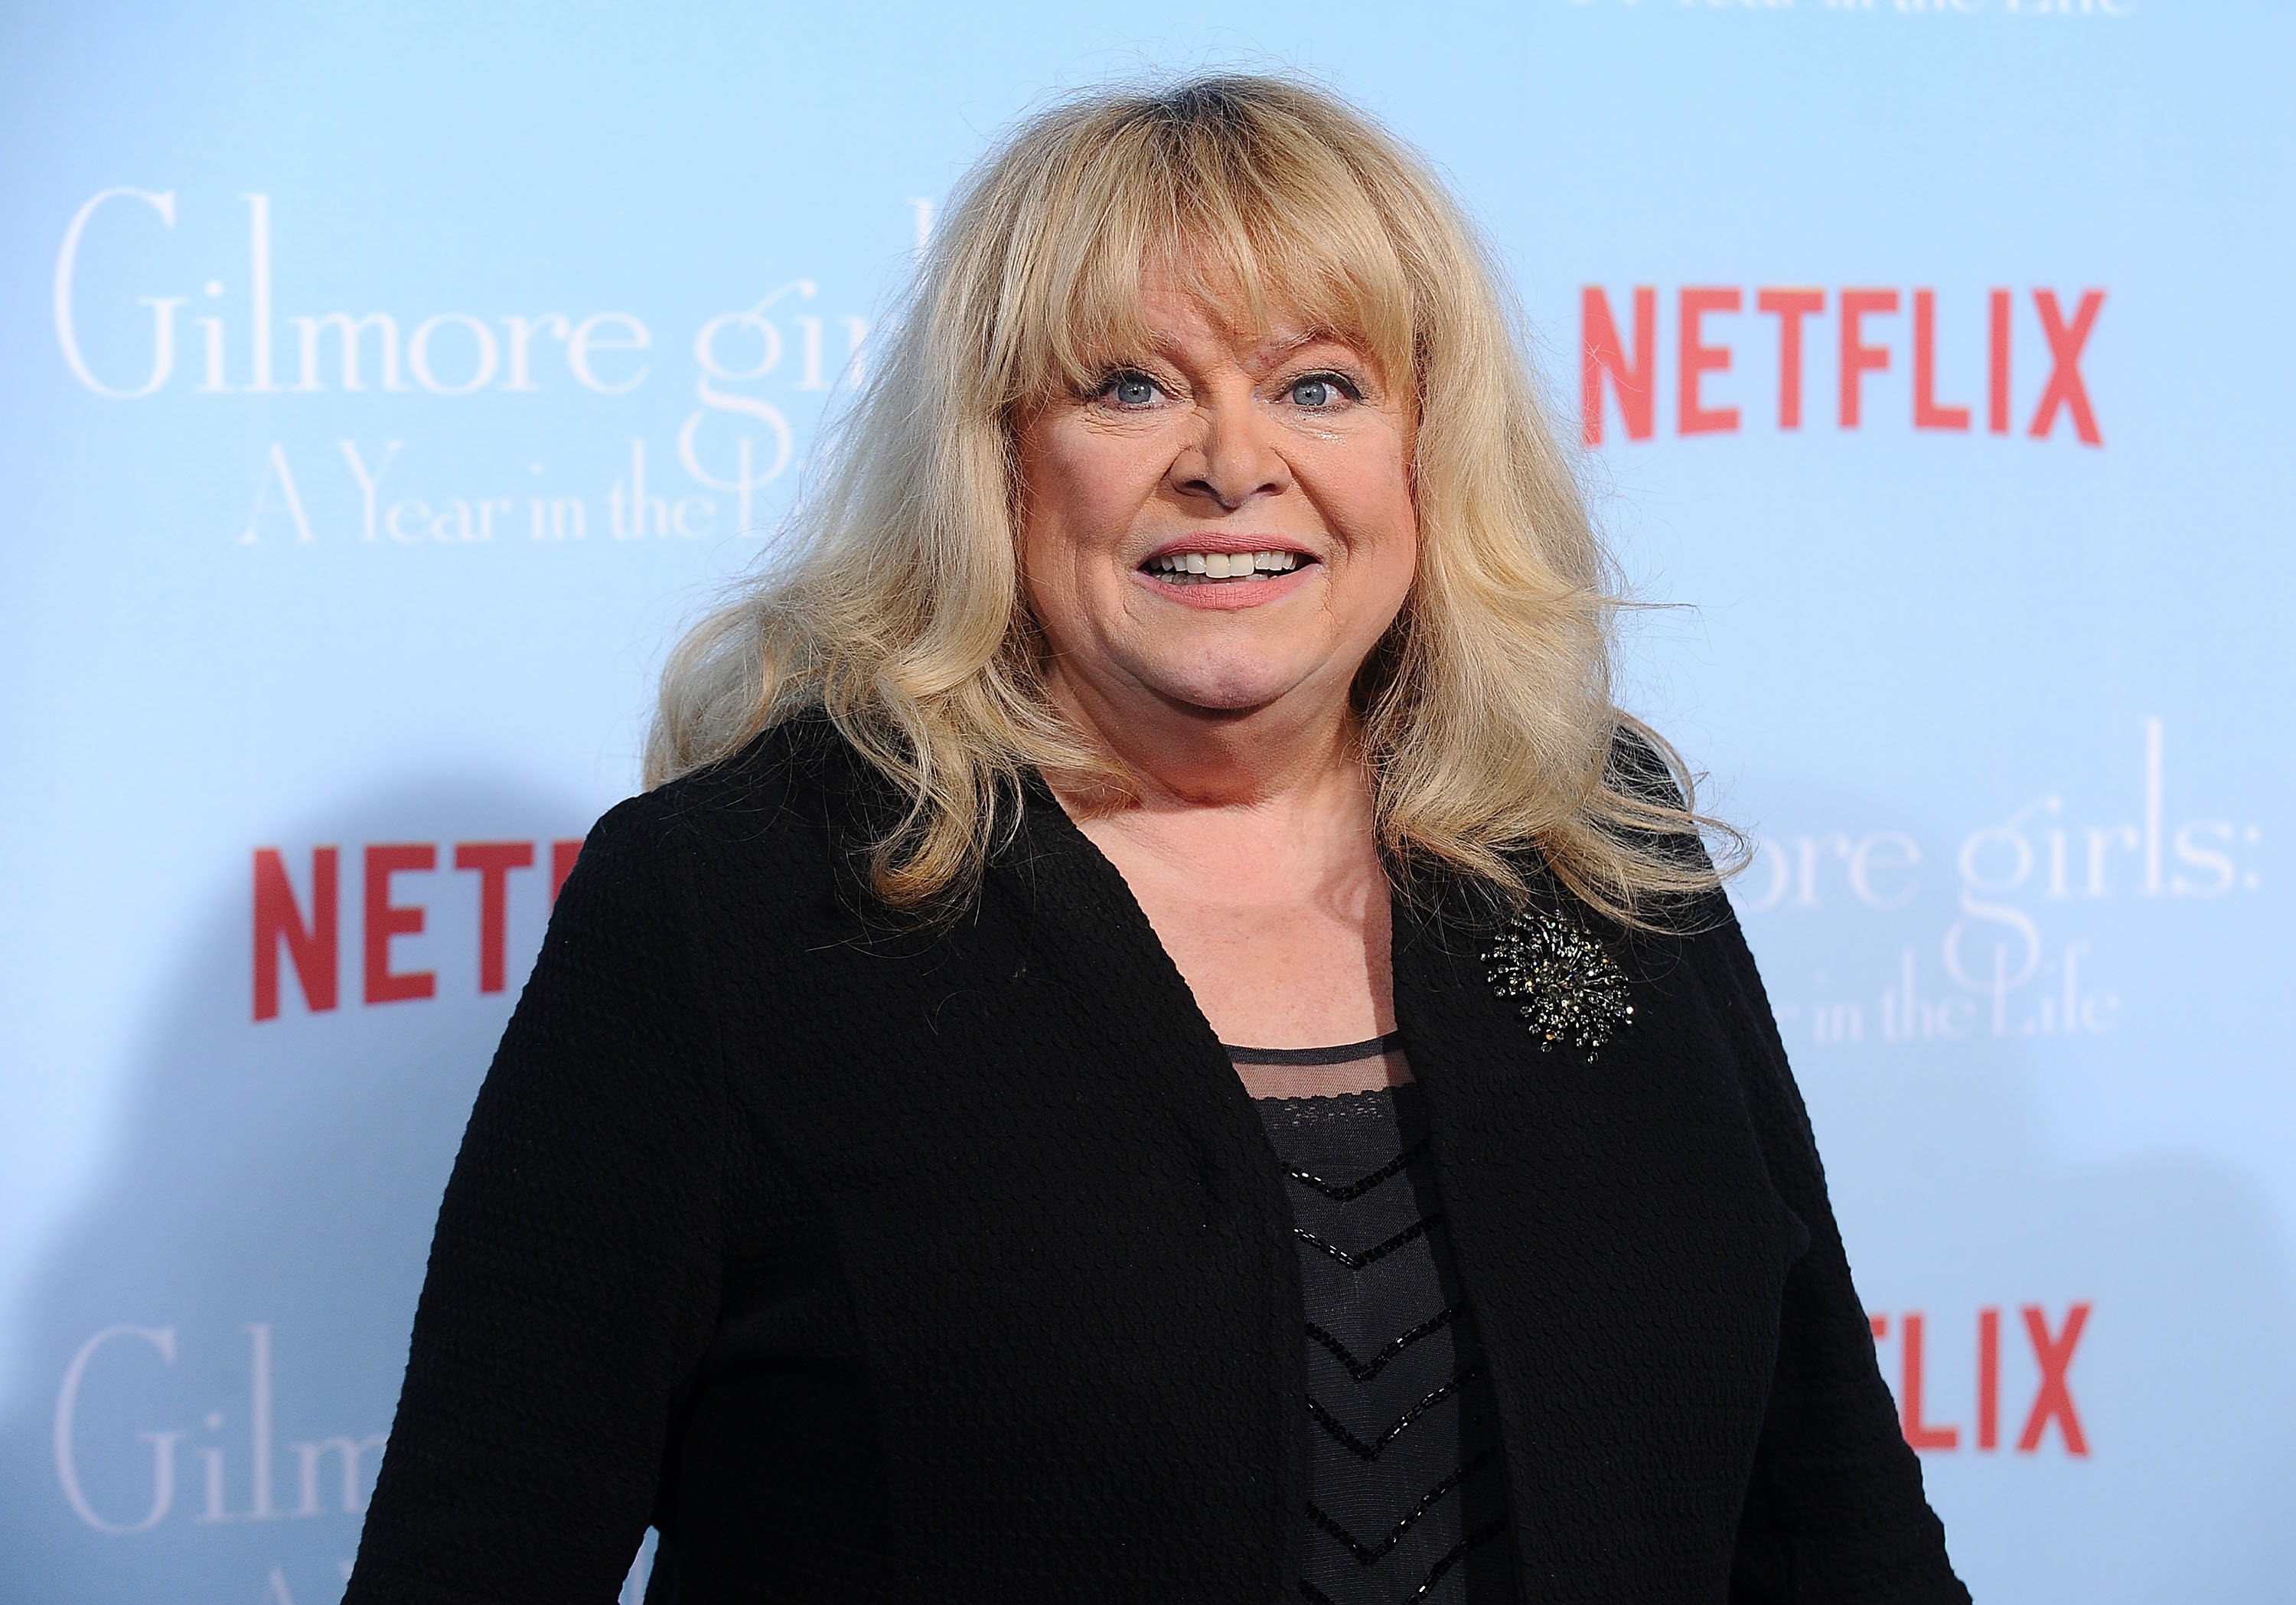 Sally Struthers attends the premiere of "Gilmore Girls: A Year in the Life" at Regency Bruin Theatre on November 18, 2016 in Los Angeles, California | Source: Getty Images 